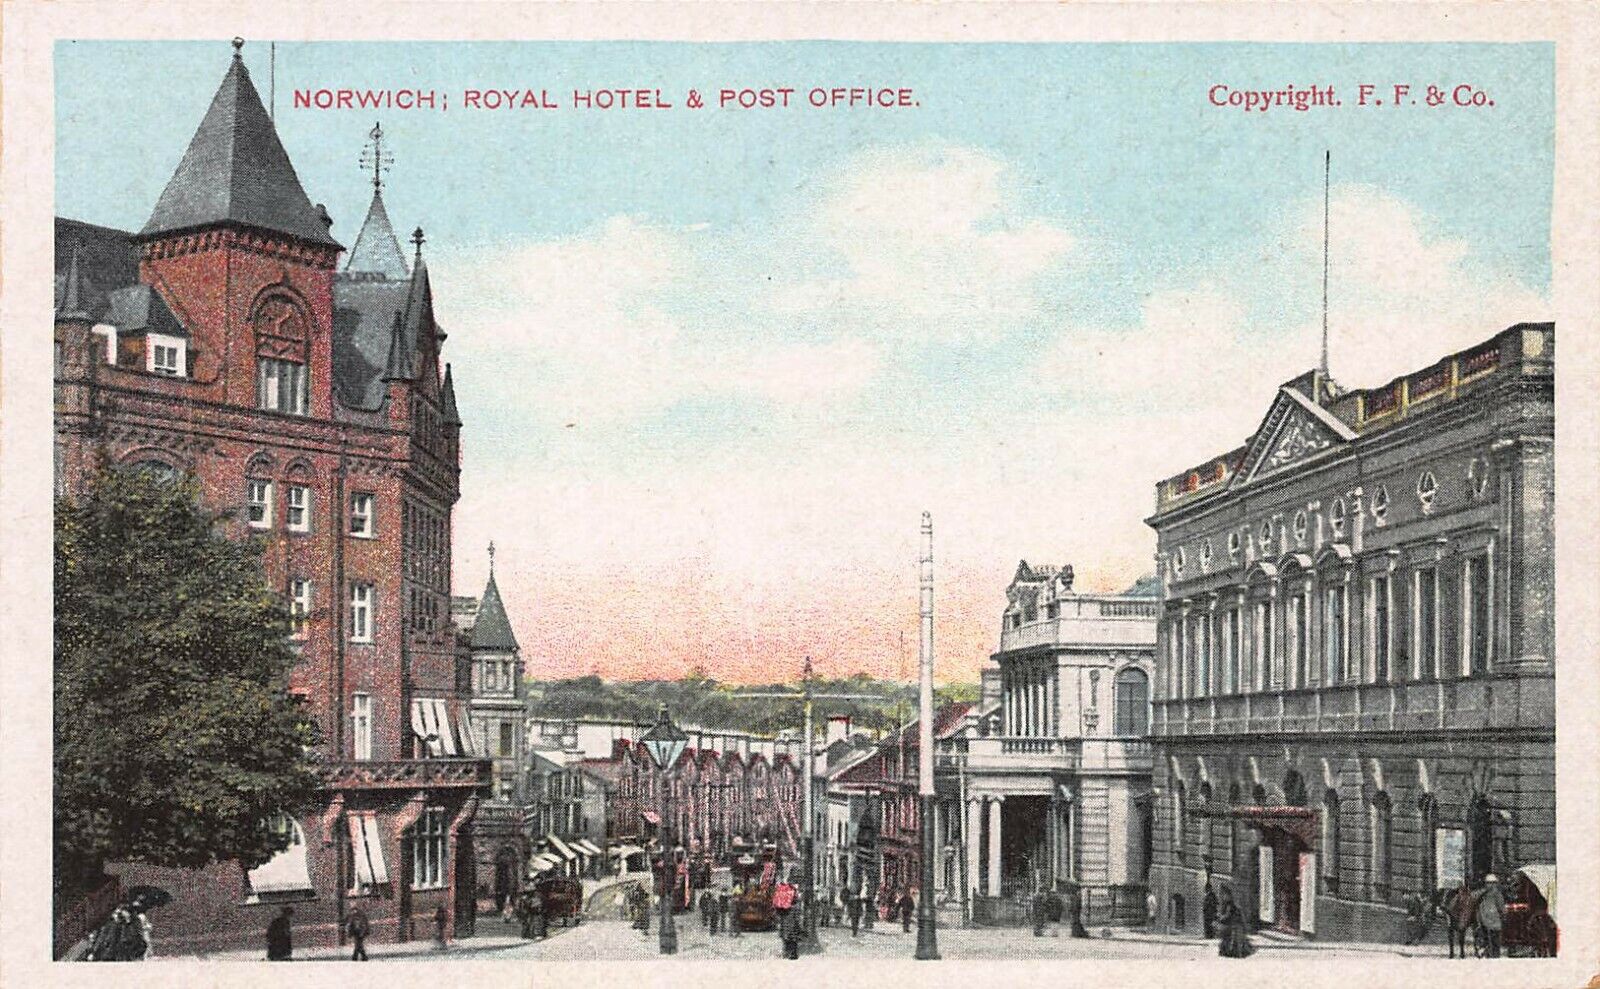 Royal Hotel & Post Office, Norwich, England, Great Britain, early postcard